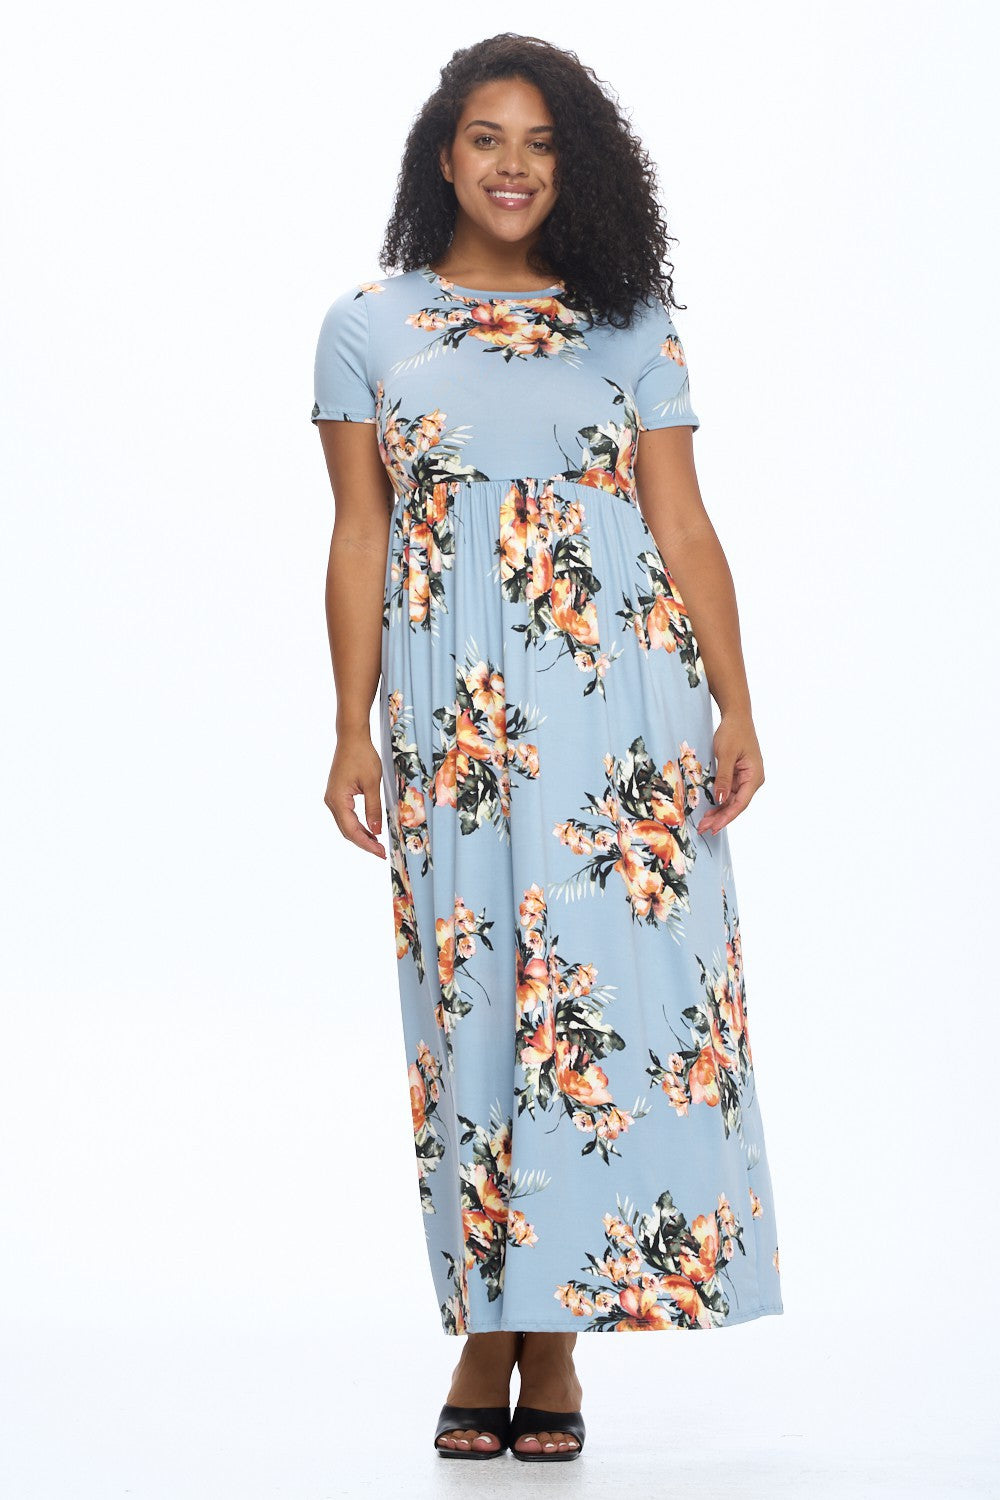 Plus Floral Short Sleeve Maxi Dress in Blue Floral Style 2045X